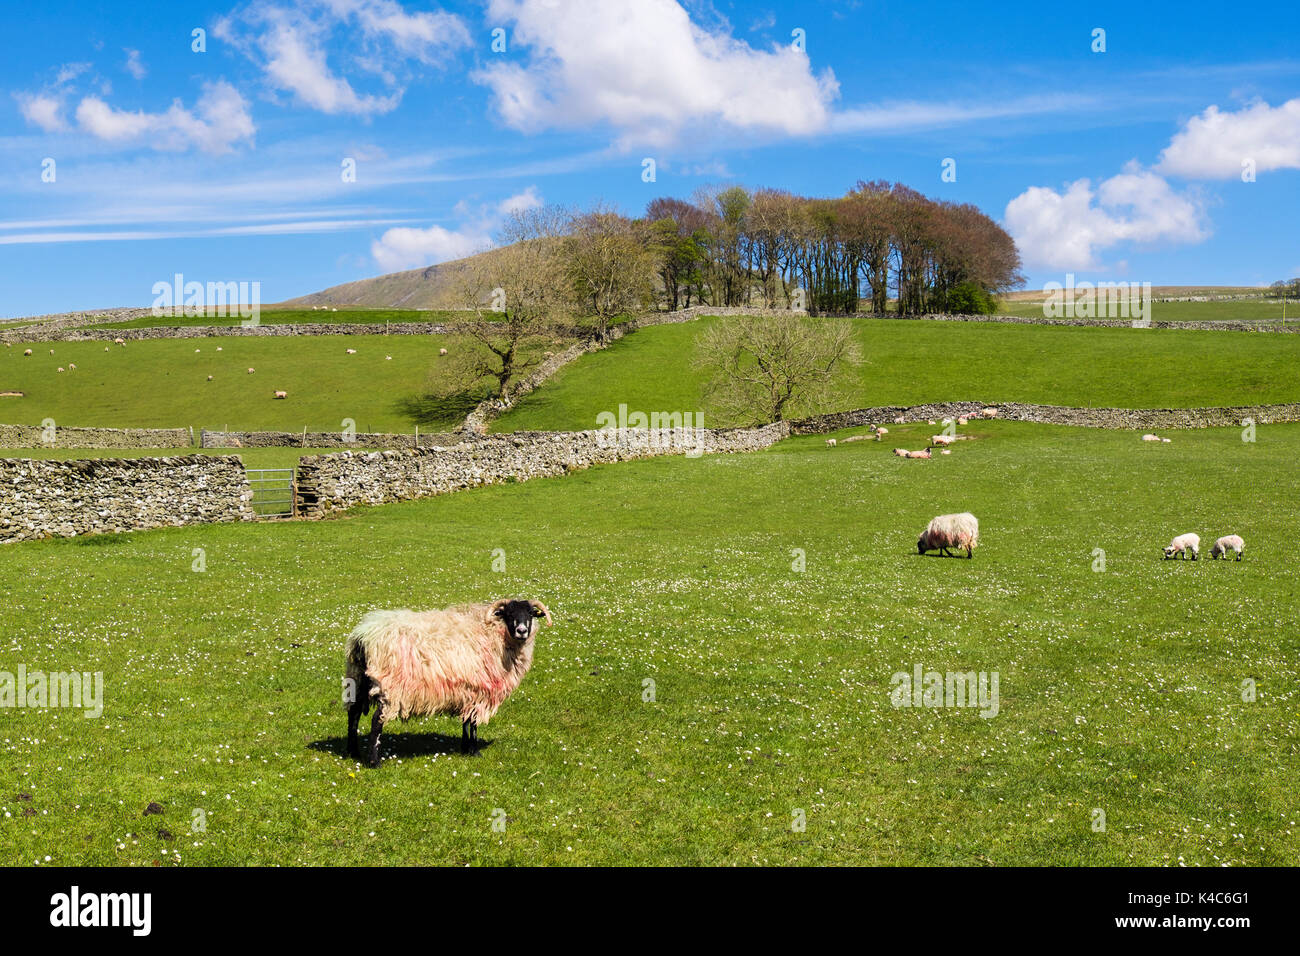 Scottish Blackface sheep with lambs on hillside field in spring. Horton-in-Ribblesdale, Yorkshire Dales National Park, North Yorkshire, England, UK Stock Photo